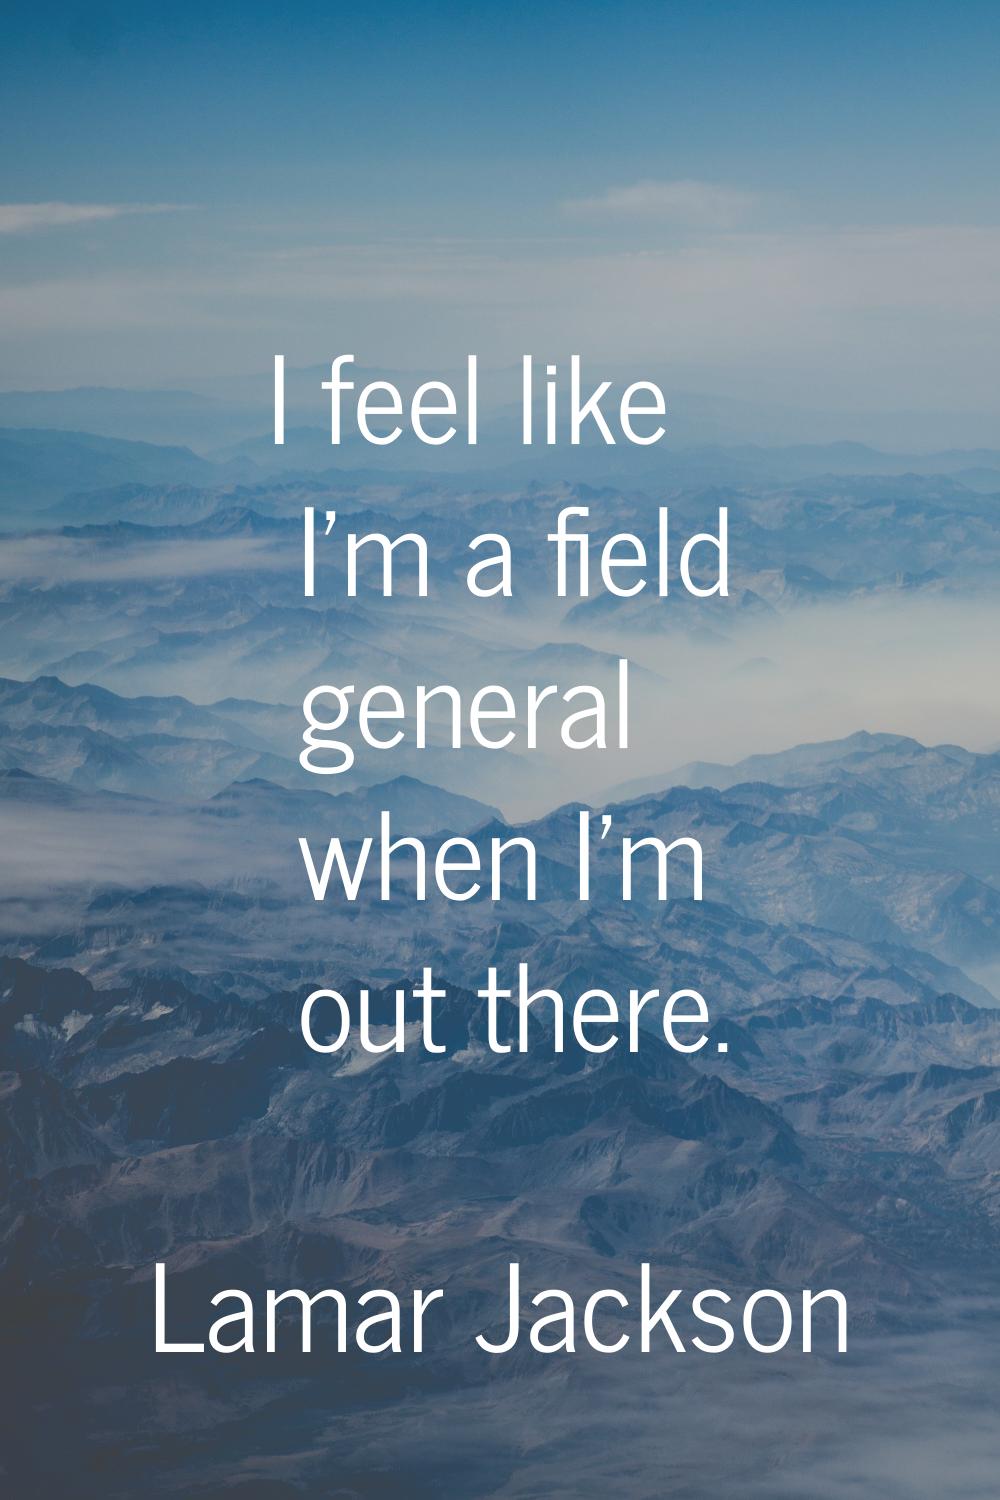 I feel like I'm a field general when I'm out there.